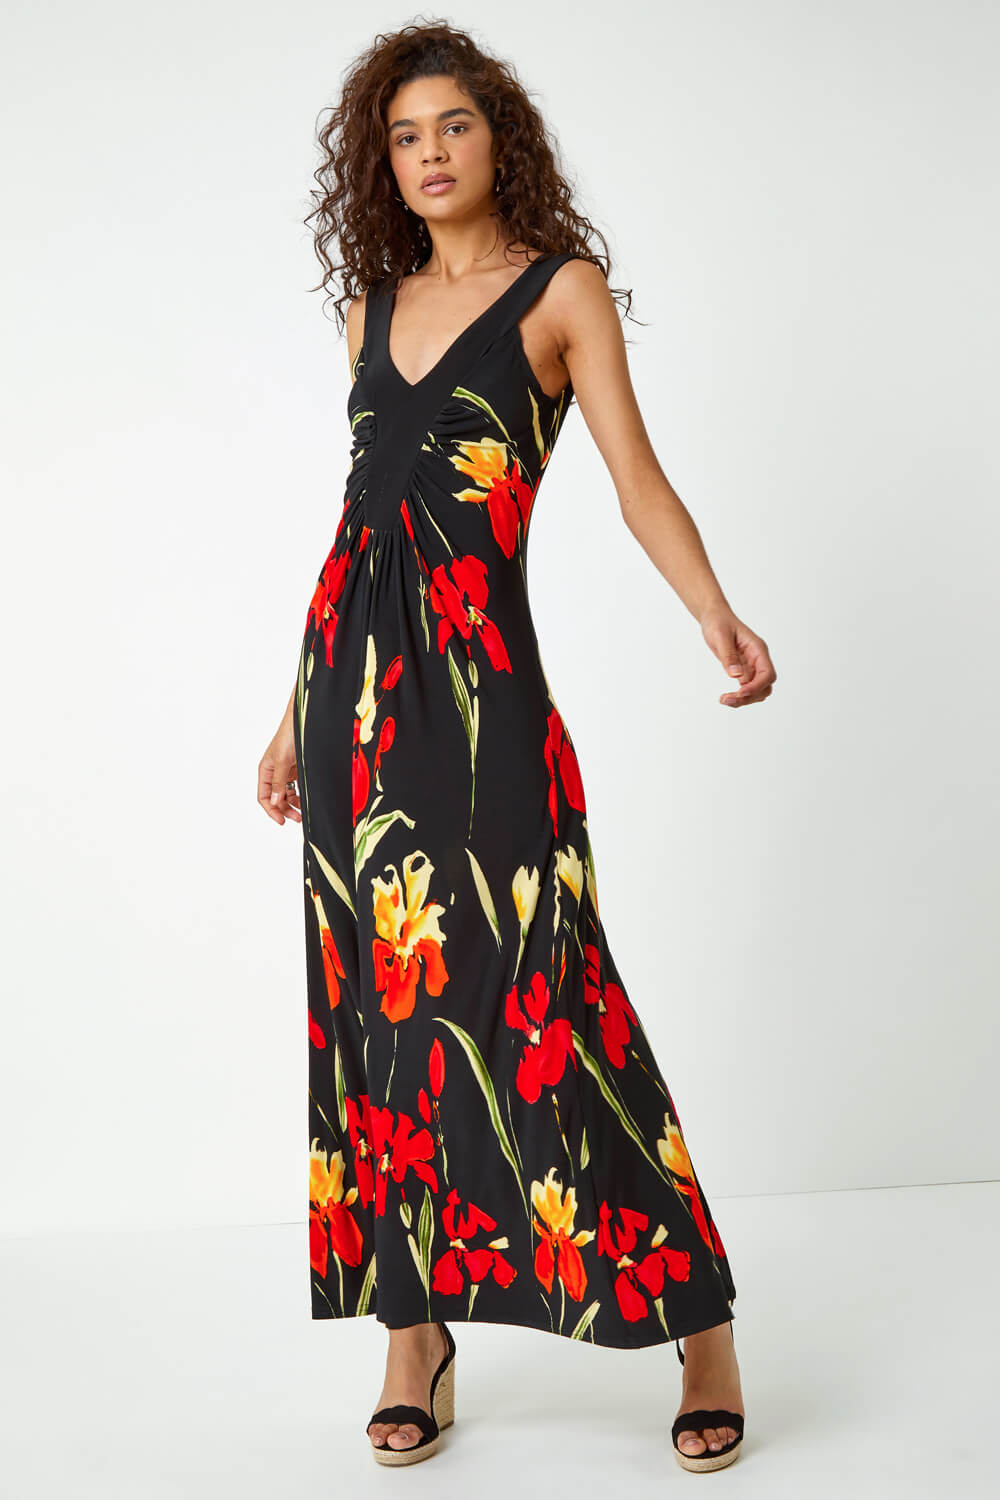 Black Floral Stretch Jersey Maxi Dress, Image 2 of 6